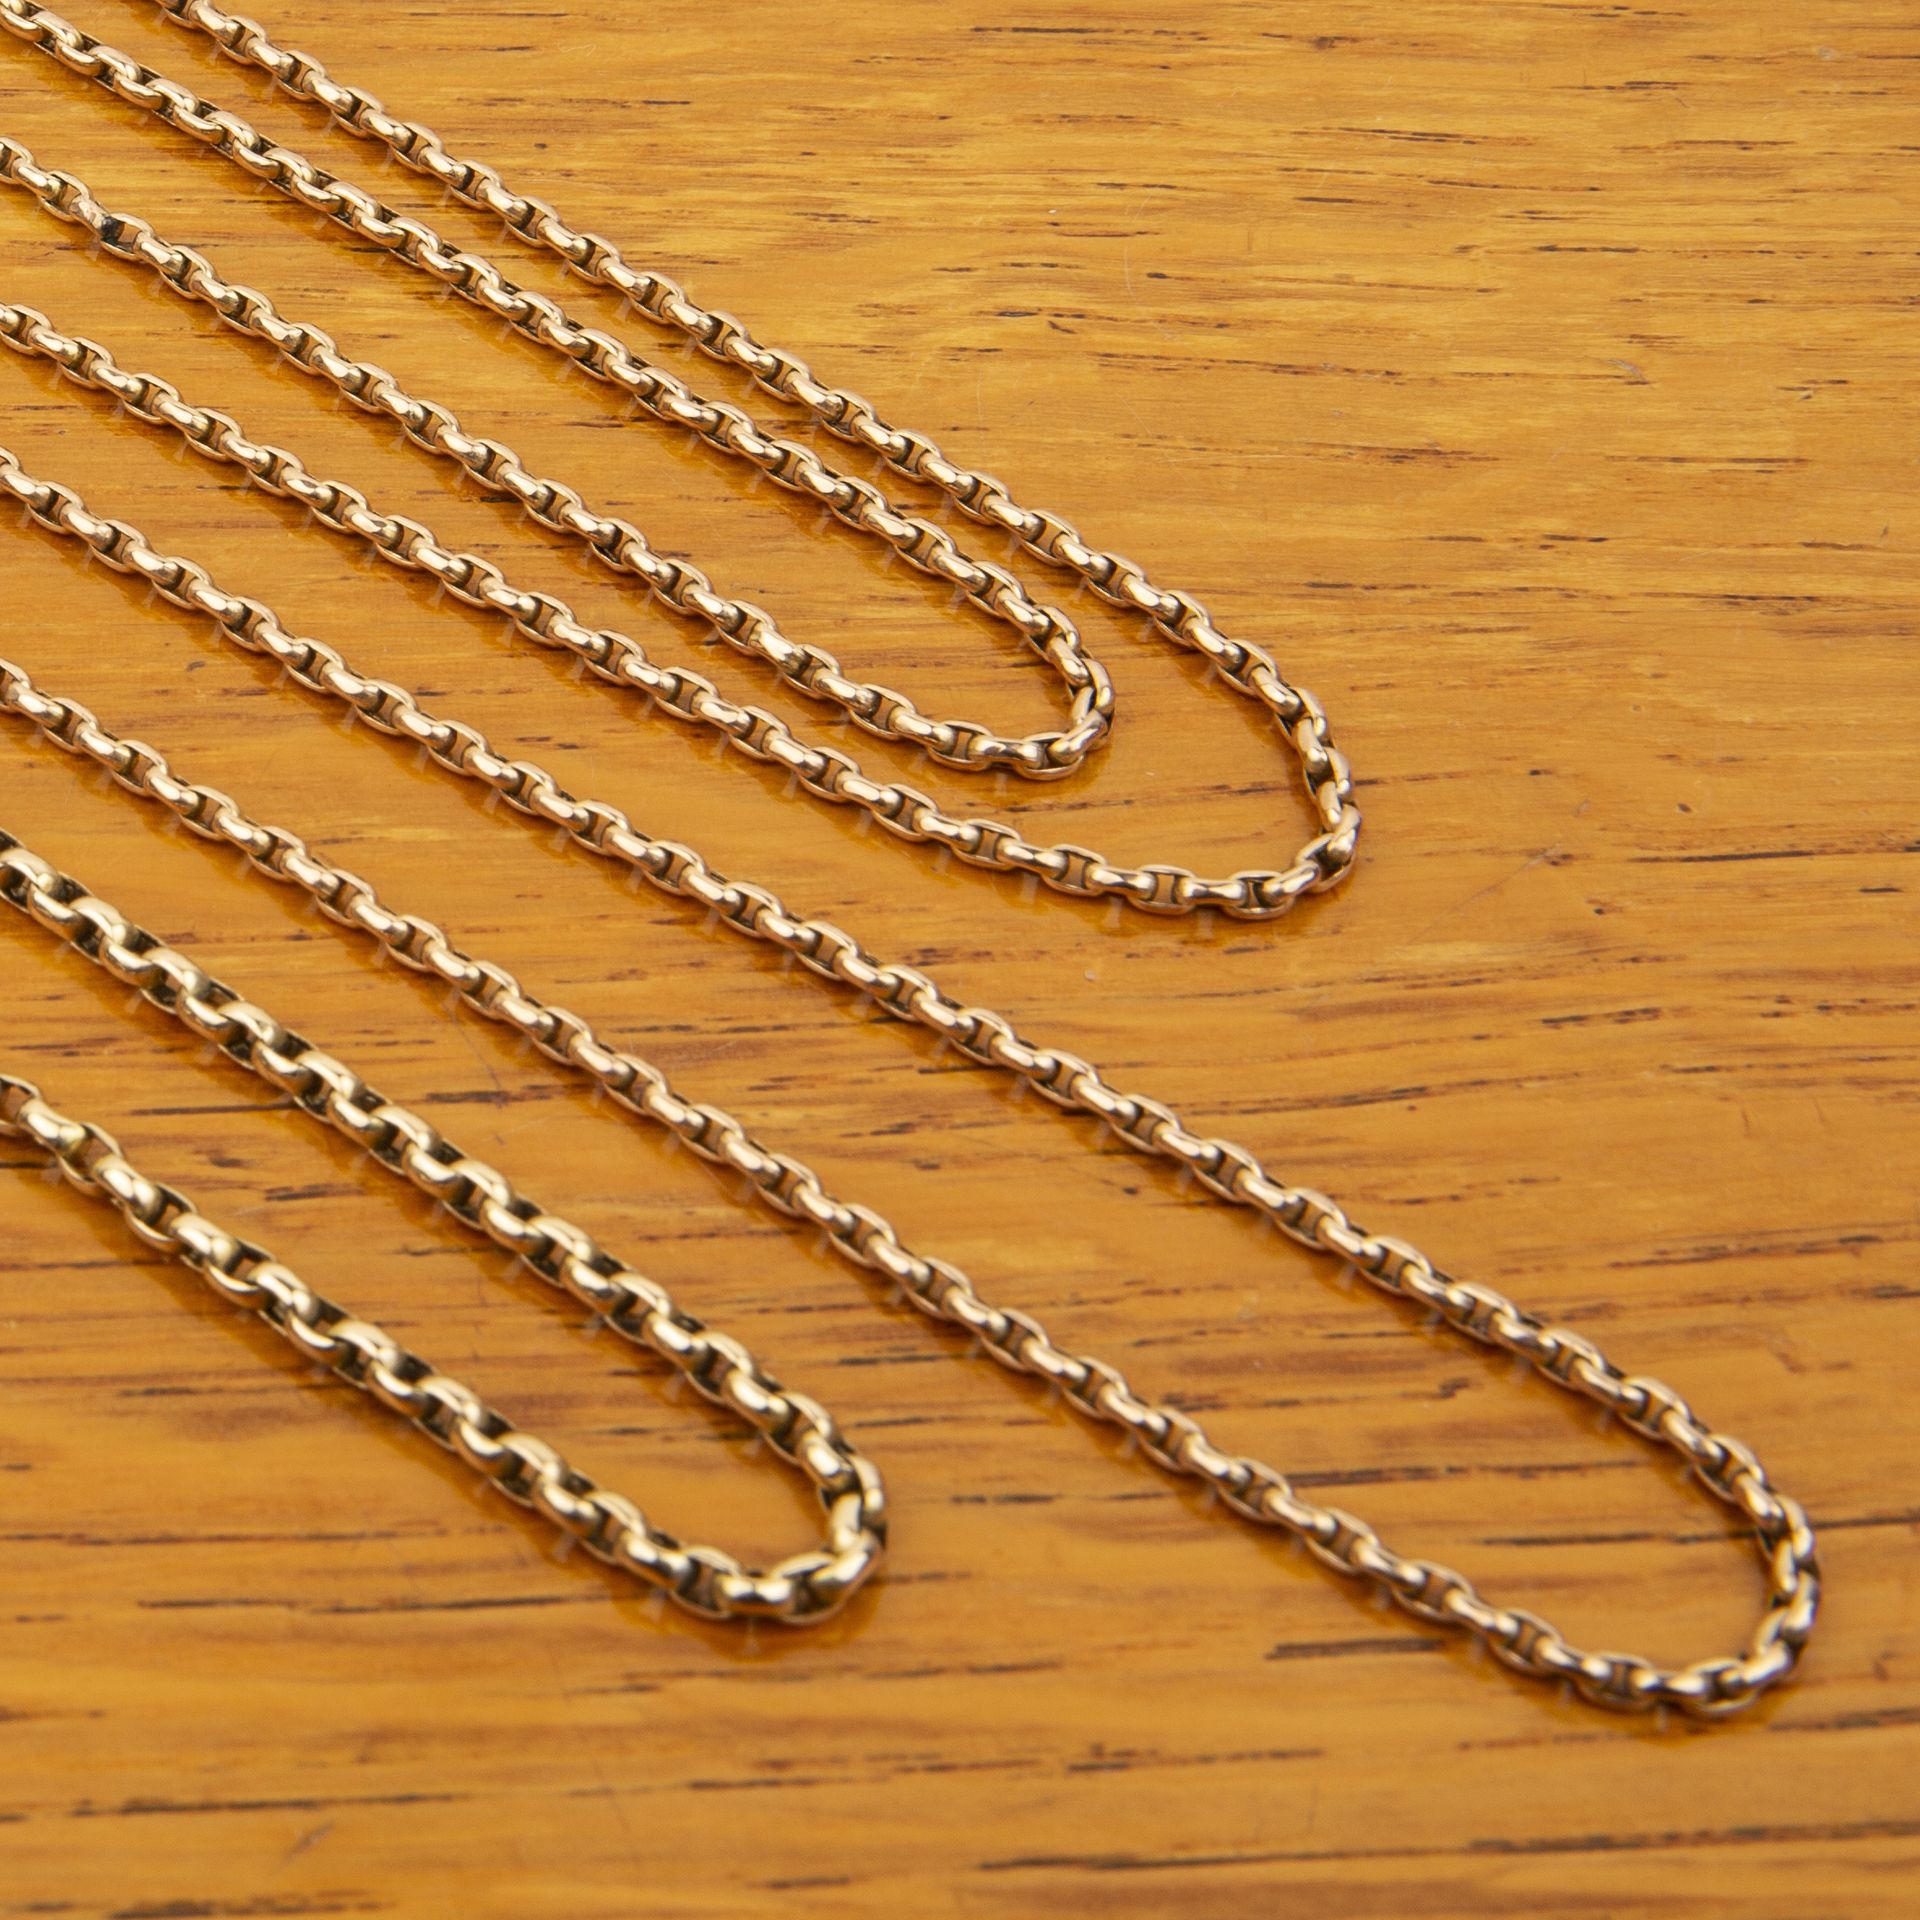 9ct yellow gold guard chain marked '9C' near the o ring, 150cm approx overall, 26g approx overall - Bild 2 aus 2